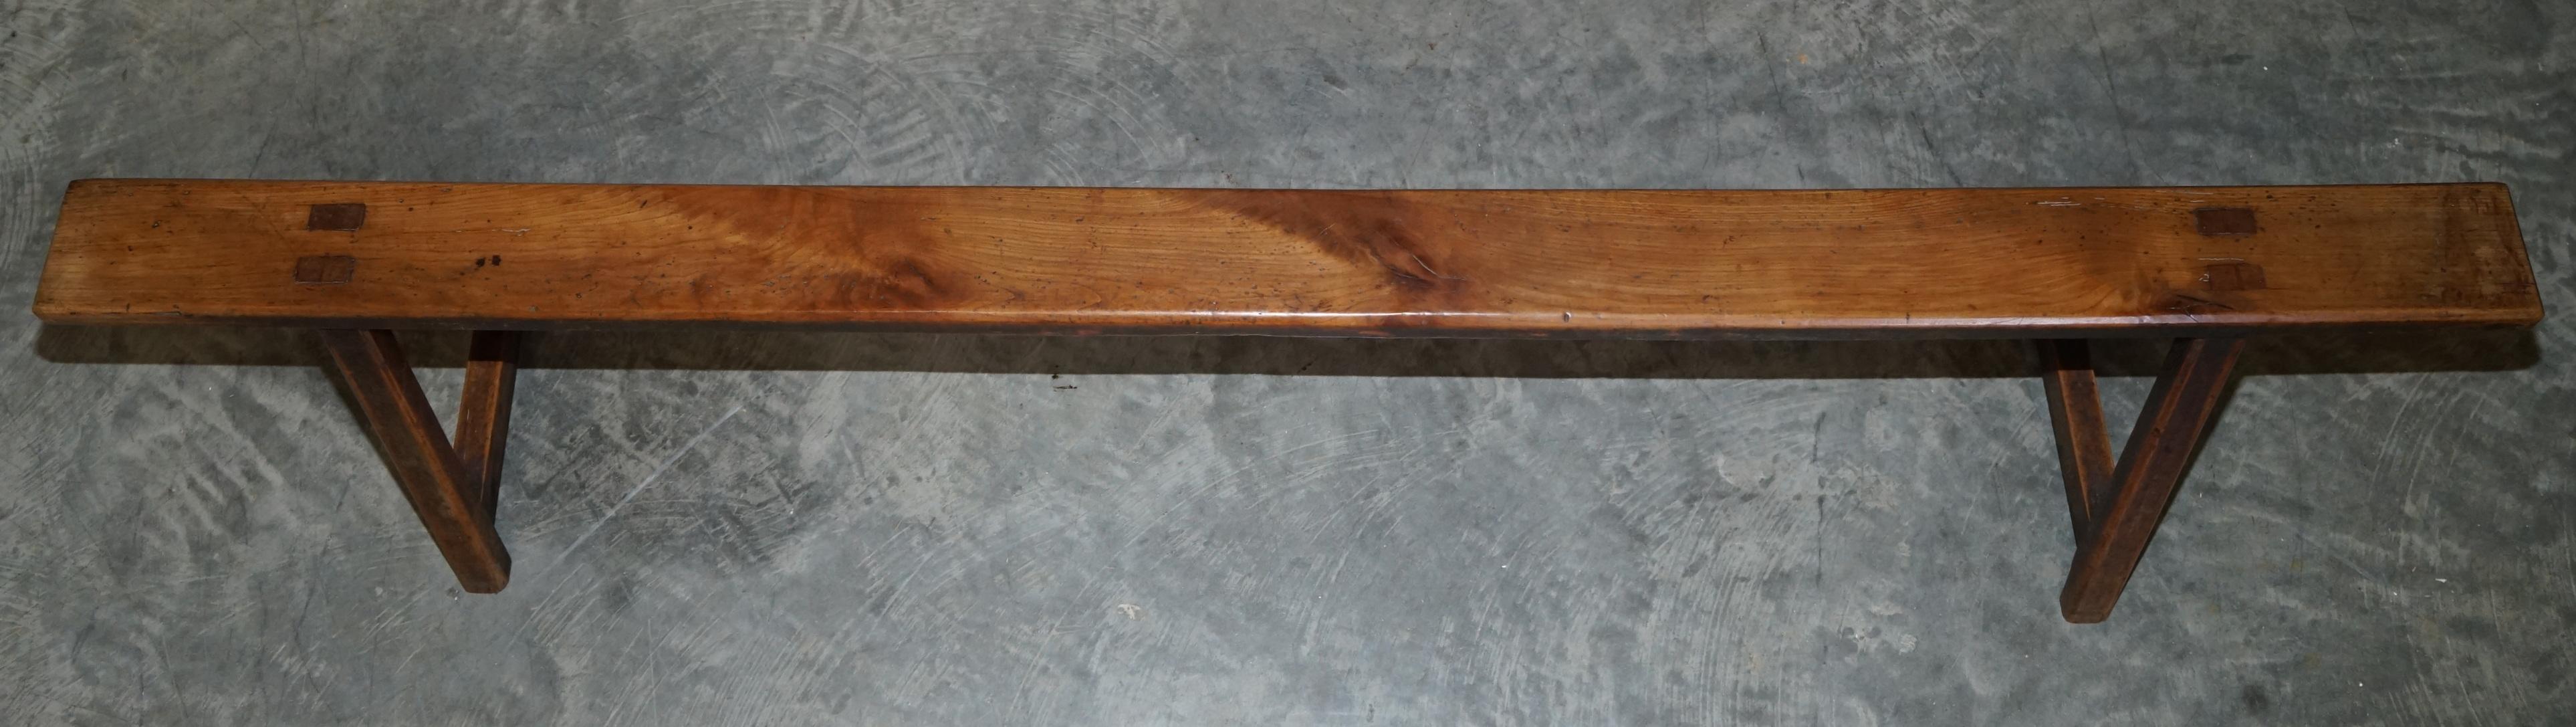 Hand-Crafted Pair of Antique Victorian Fruitwood Trestle Benches for Long Dining Tables For Sale